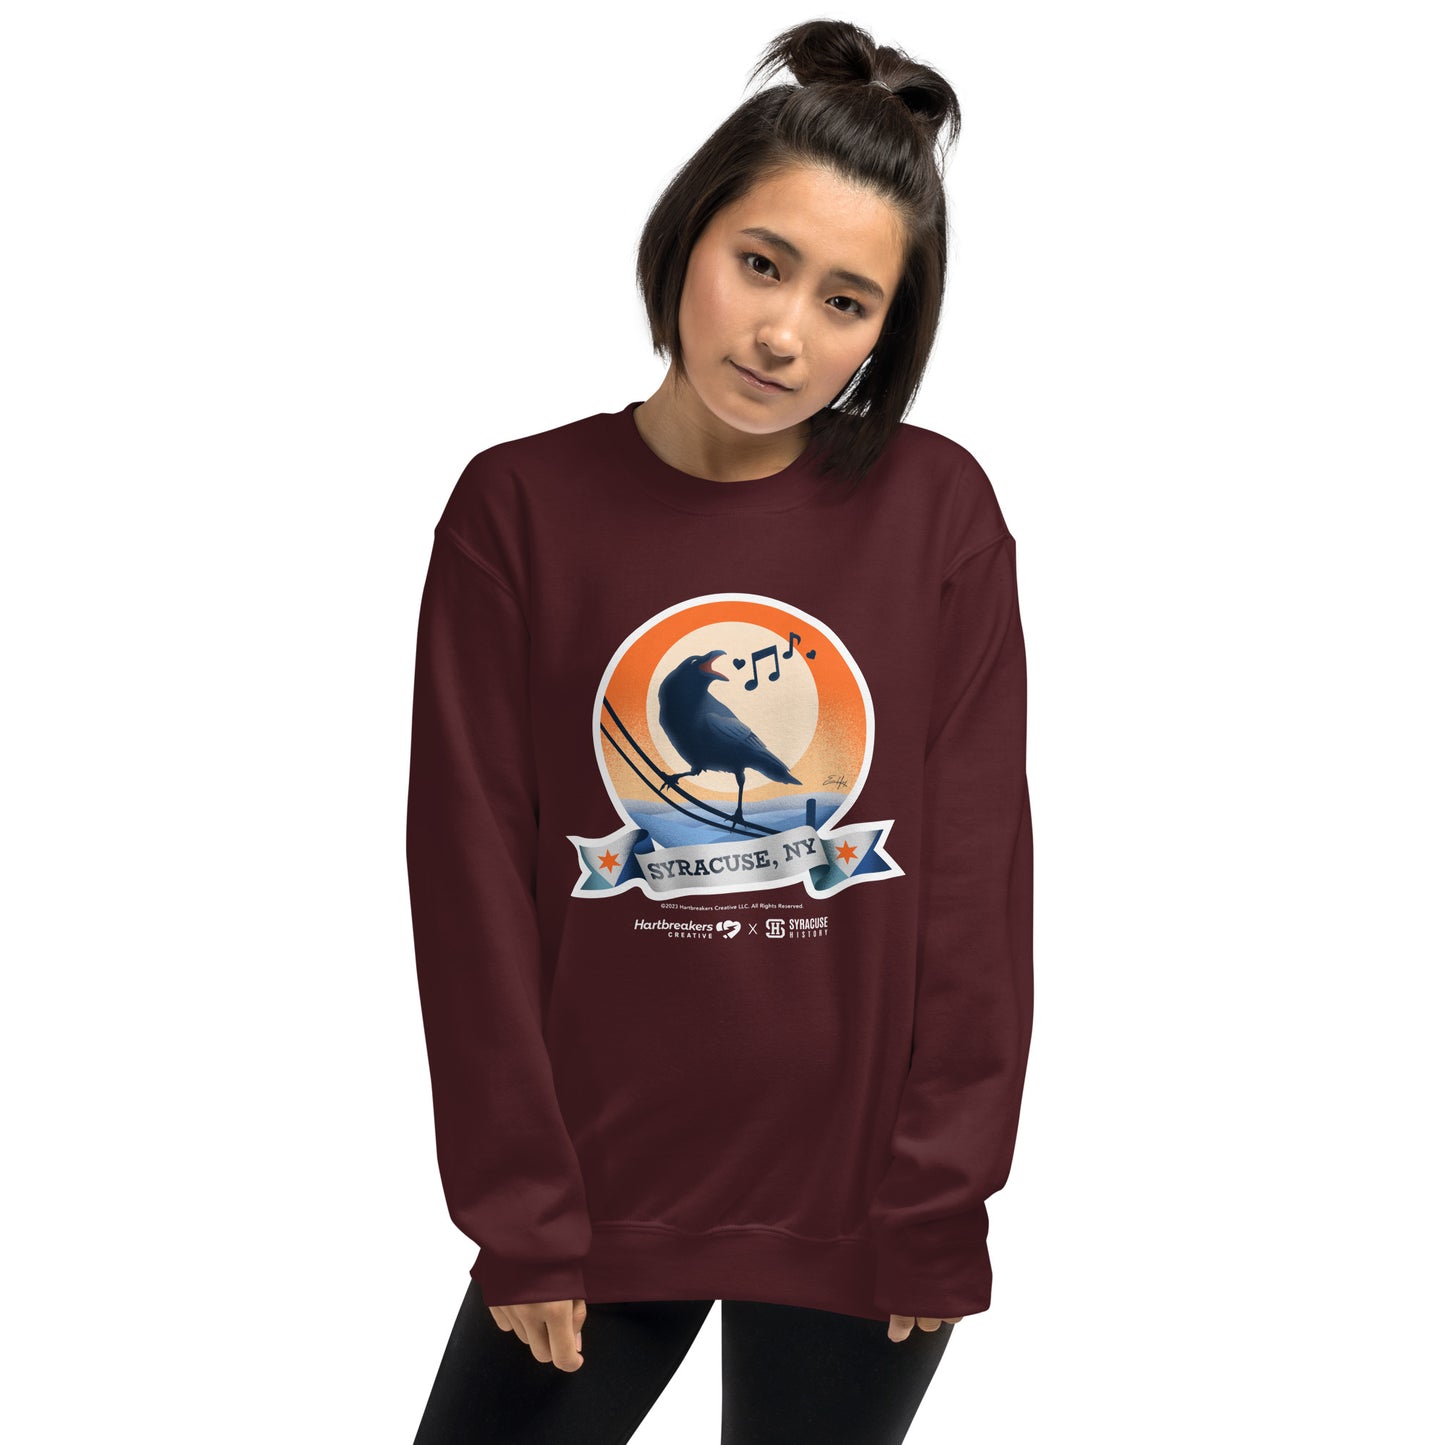 A woman wearing a maroon sweatshirt featuring an illustration of a crow on a telephone wire and a banner beneath it that says Syracuse, NY